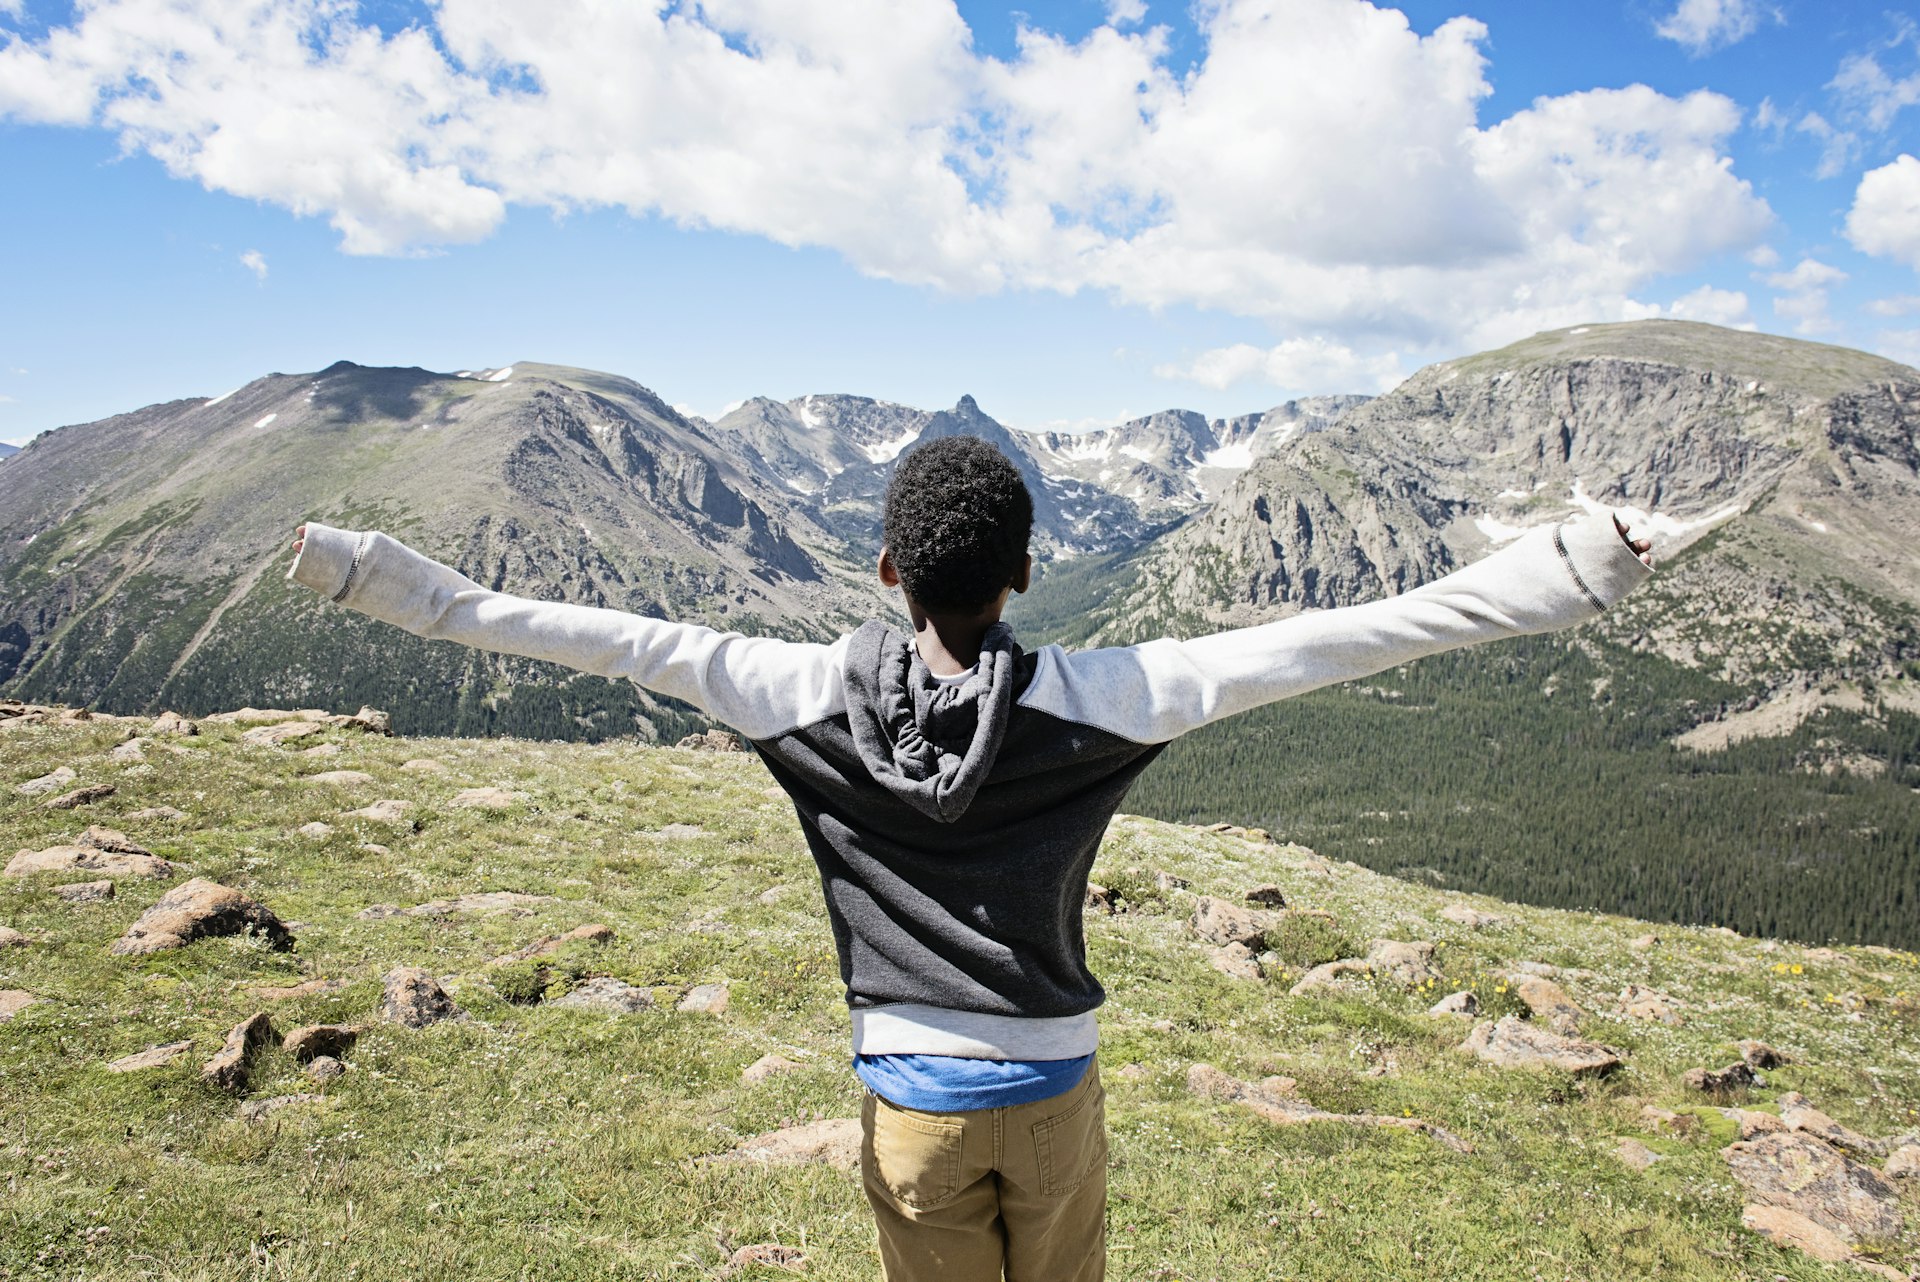 A boy with arms outstretched enjoying views of Rocky Mountain National Park, Colorado